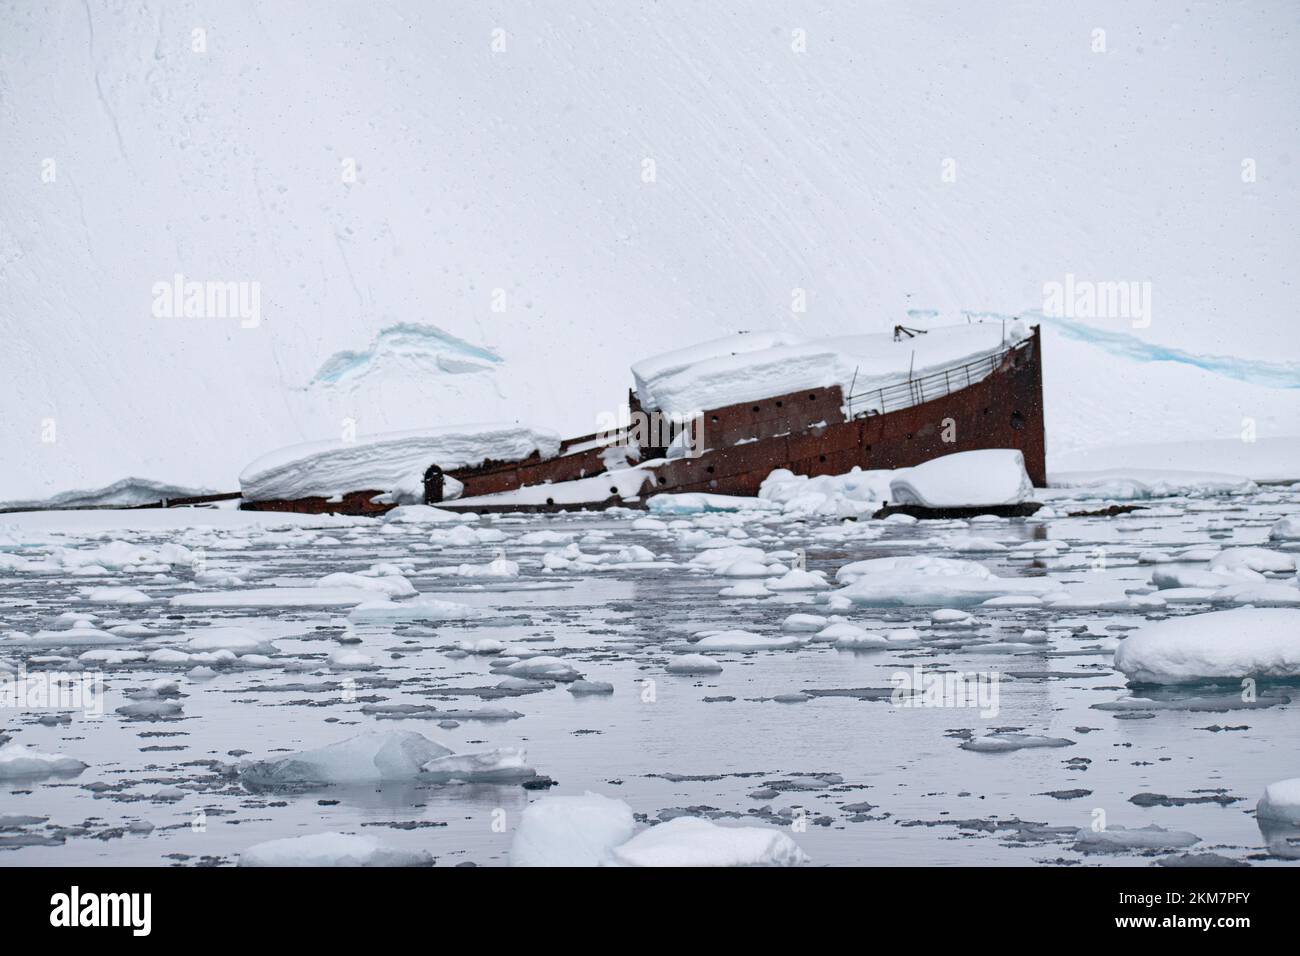 A sunken metal whaling boat, Gouvernoren, is trapped in the Ice of Antarctica Enterprise Island. Stock Photo